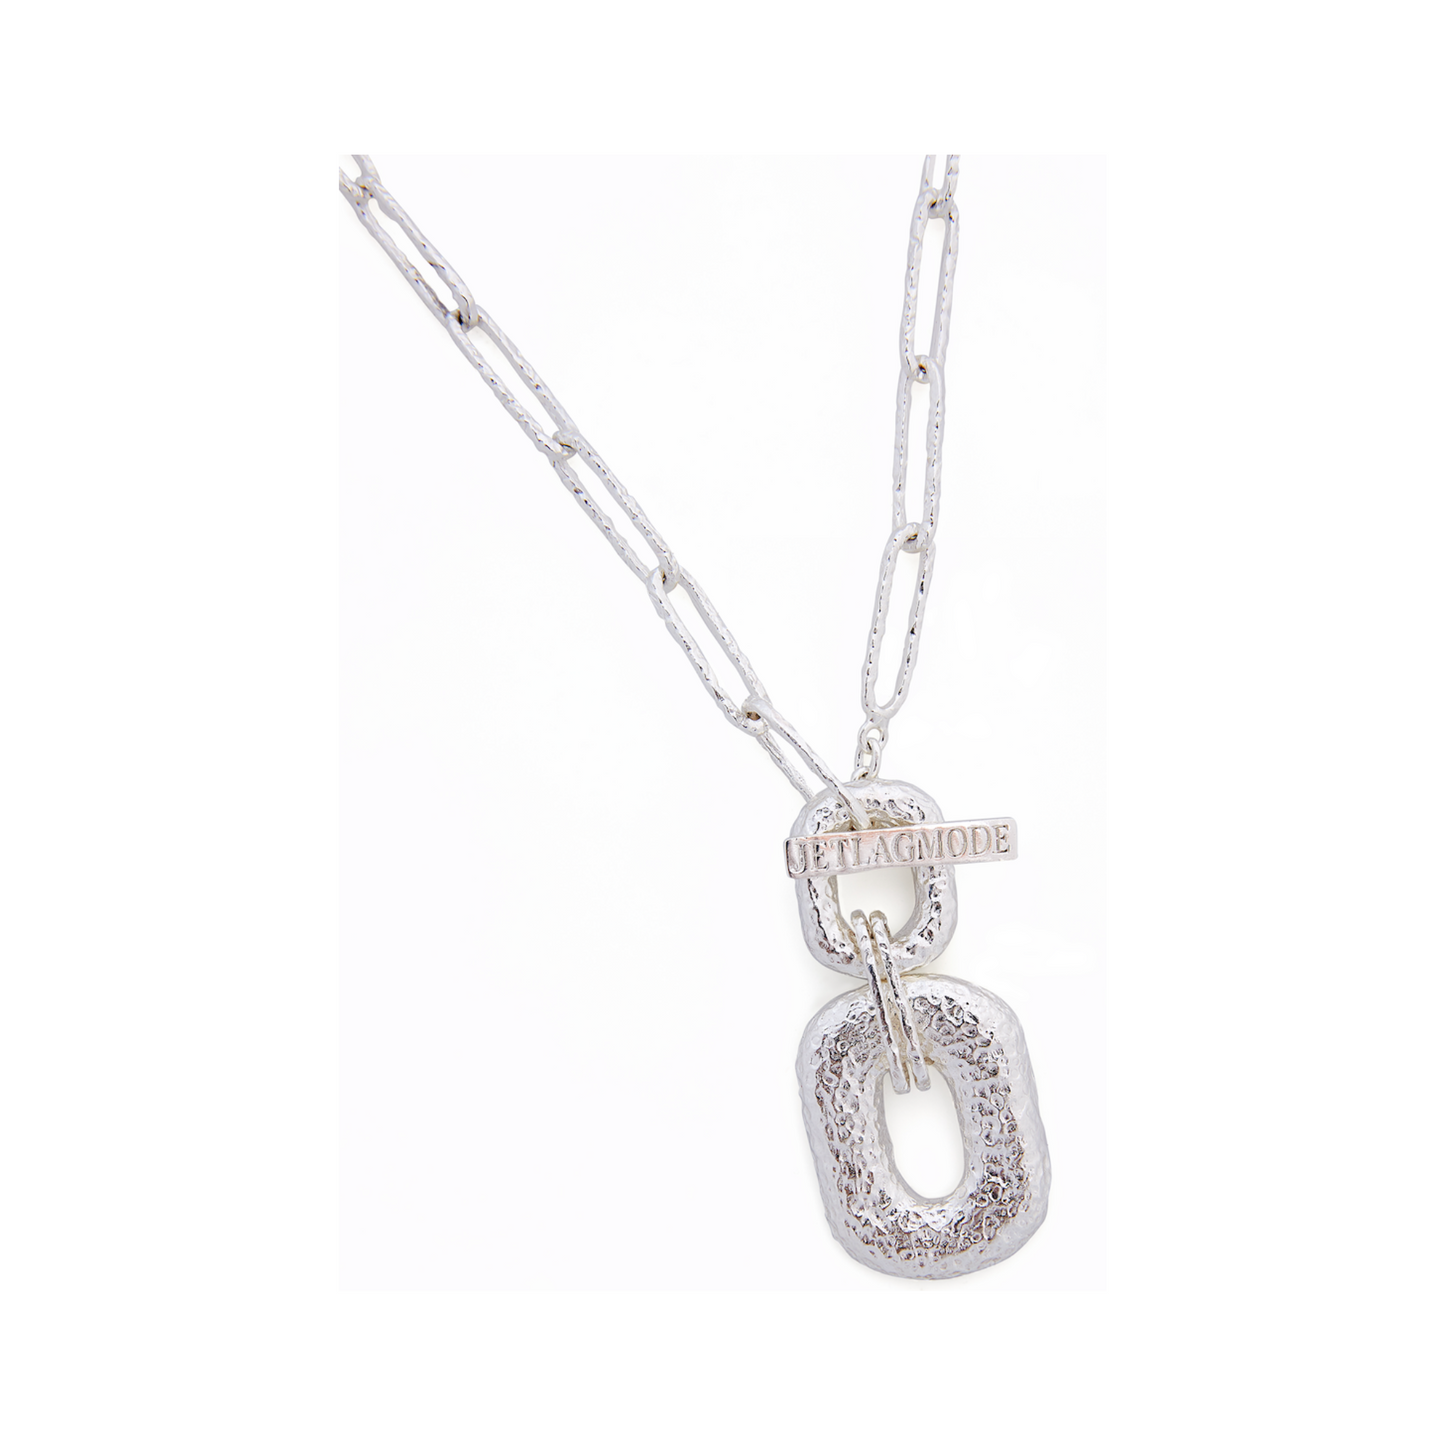 Connection Chain Necklace (Silver)